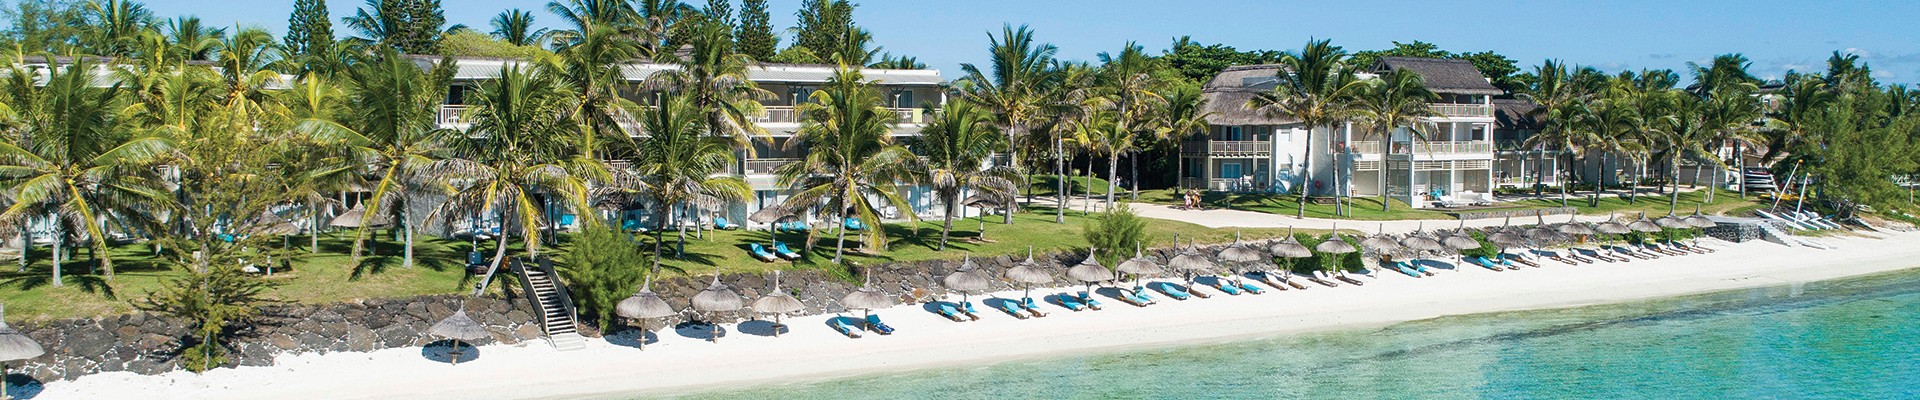 4* Solana Beach Mauritius (Adults Only) - Package (7 nights)